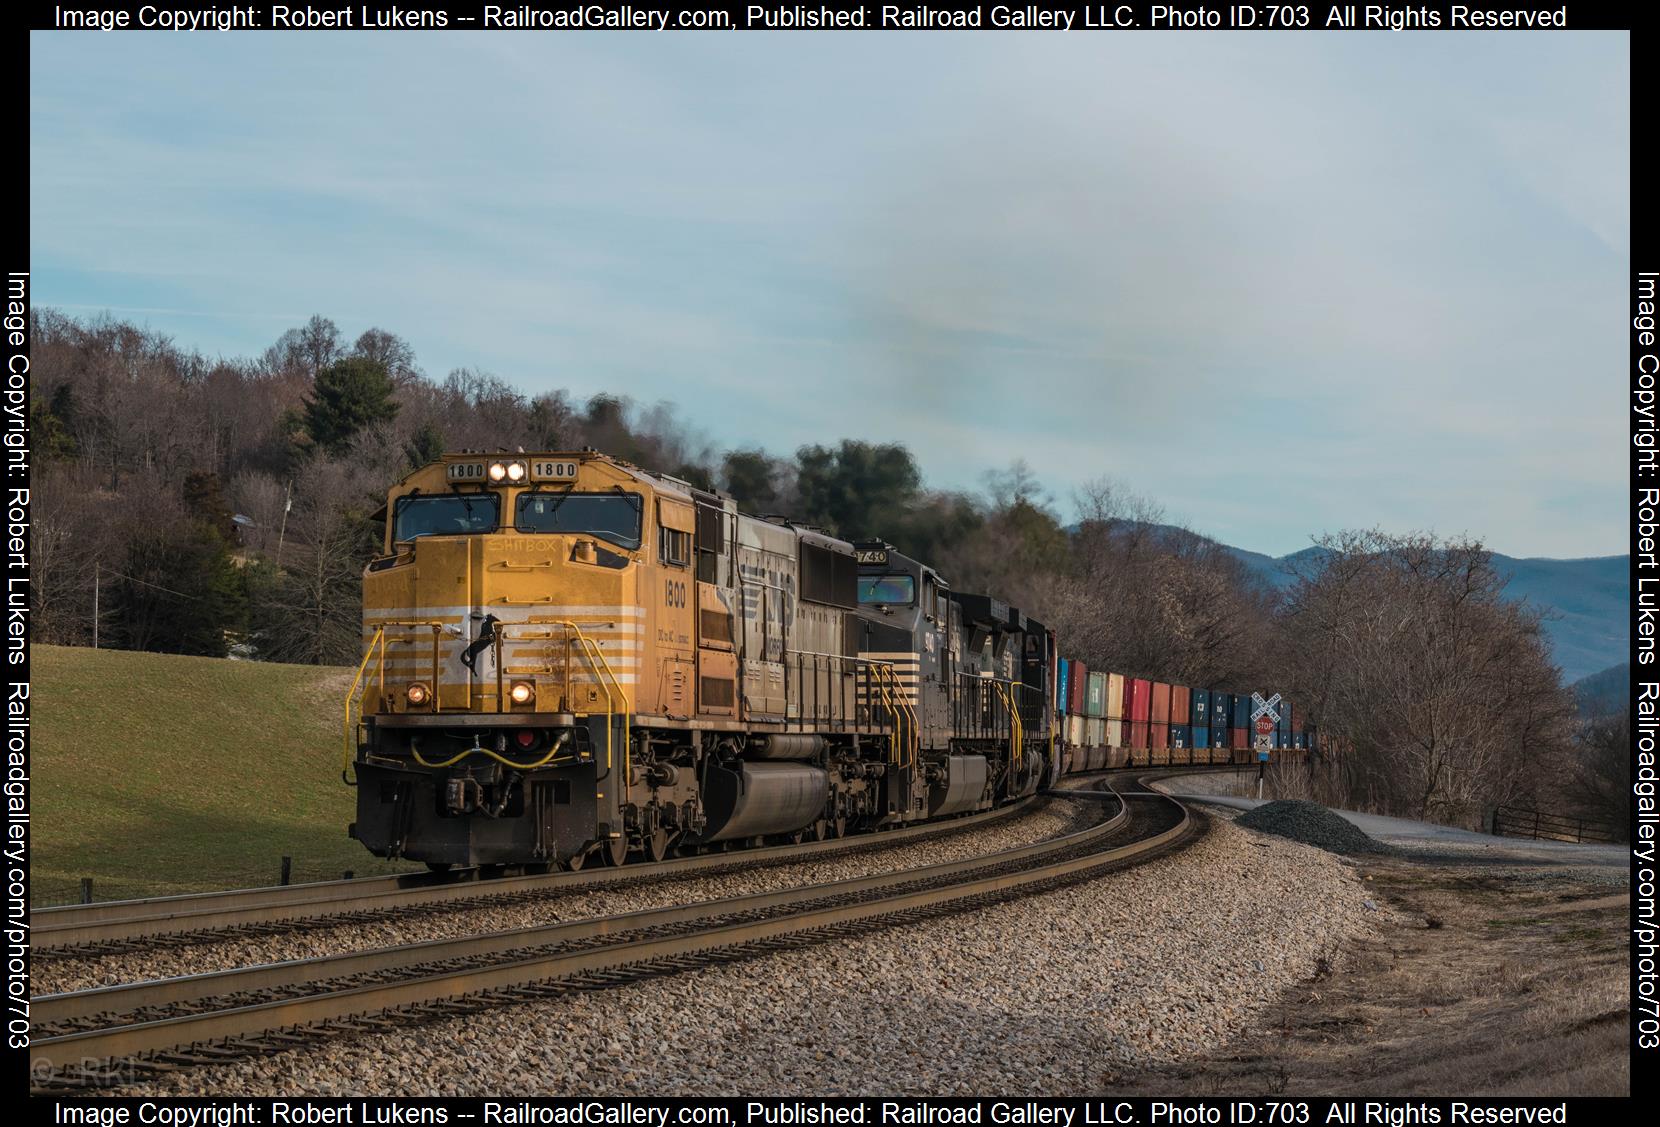 NS 279 NS 1800 is a class SD70ACC and  is pictured in Shawsville, VA, United States.  This was taken along the NS Christiansburg District on the Norfolk Southern. Photo Copyright: Robert Lukens uploaded to Railroad Gallery on 02/17/2023. This photograph of NS 279 NS 1800 was taken on Saturday, February 11, 2023. All Rights Reserved. 